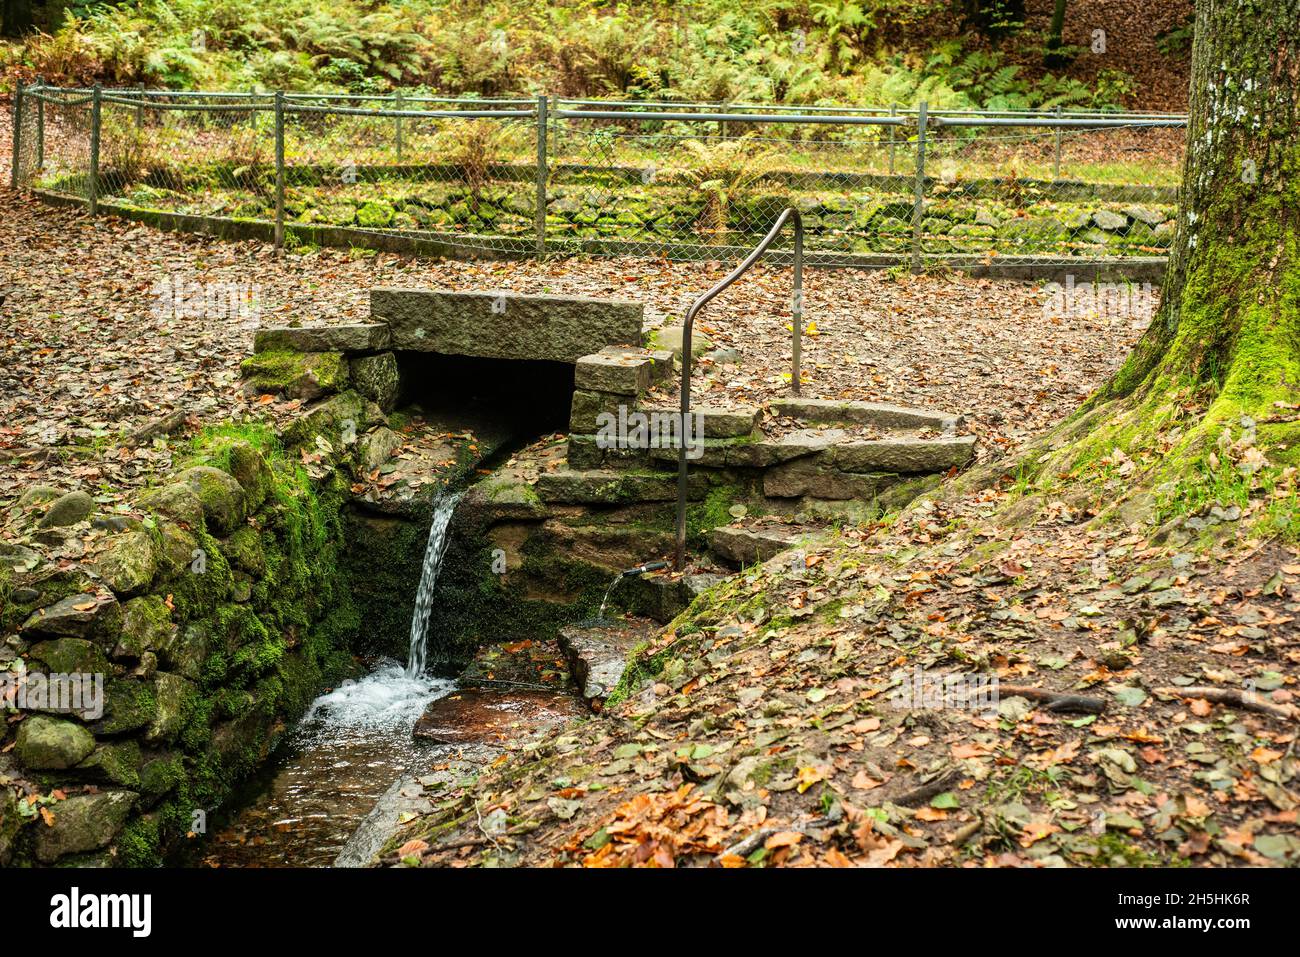 The radium source, an old healthy source in the forest in Tyringe, Scania, Sweden, Scandinavia Stock Photo